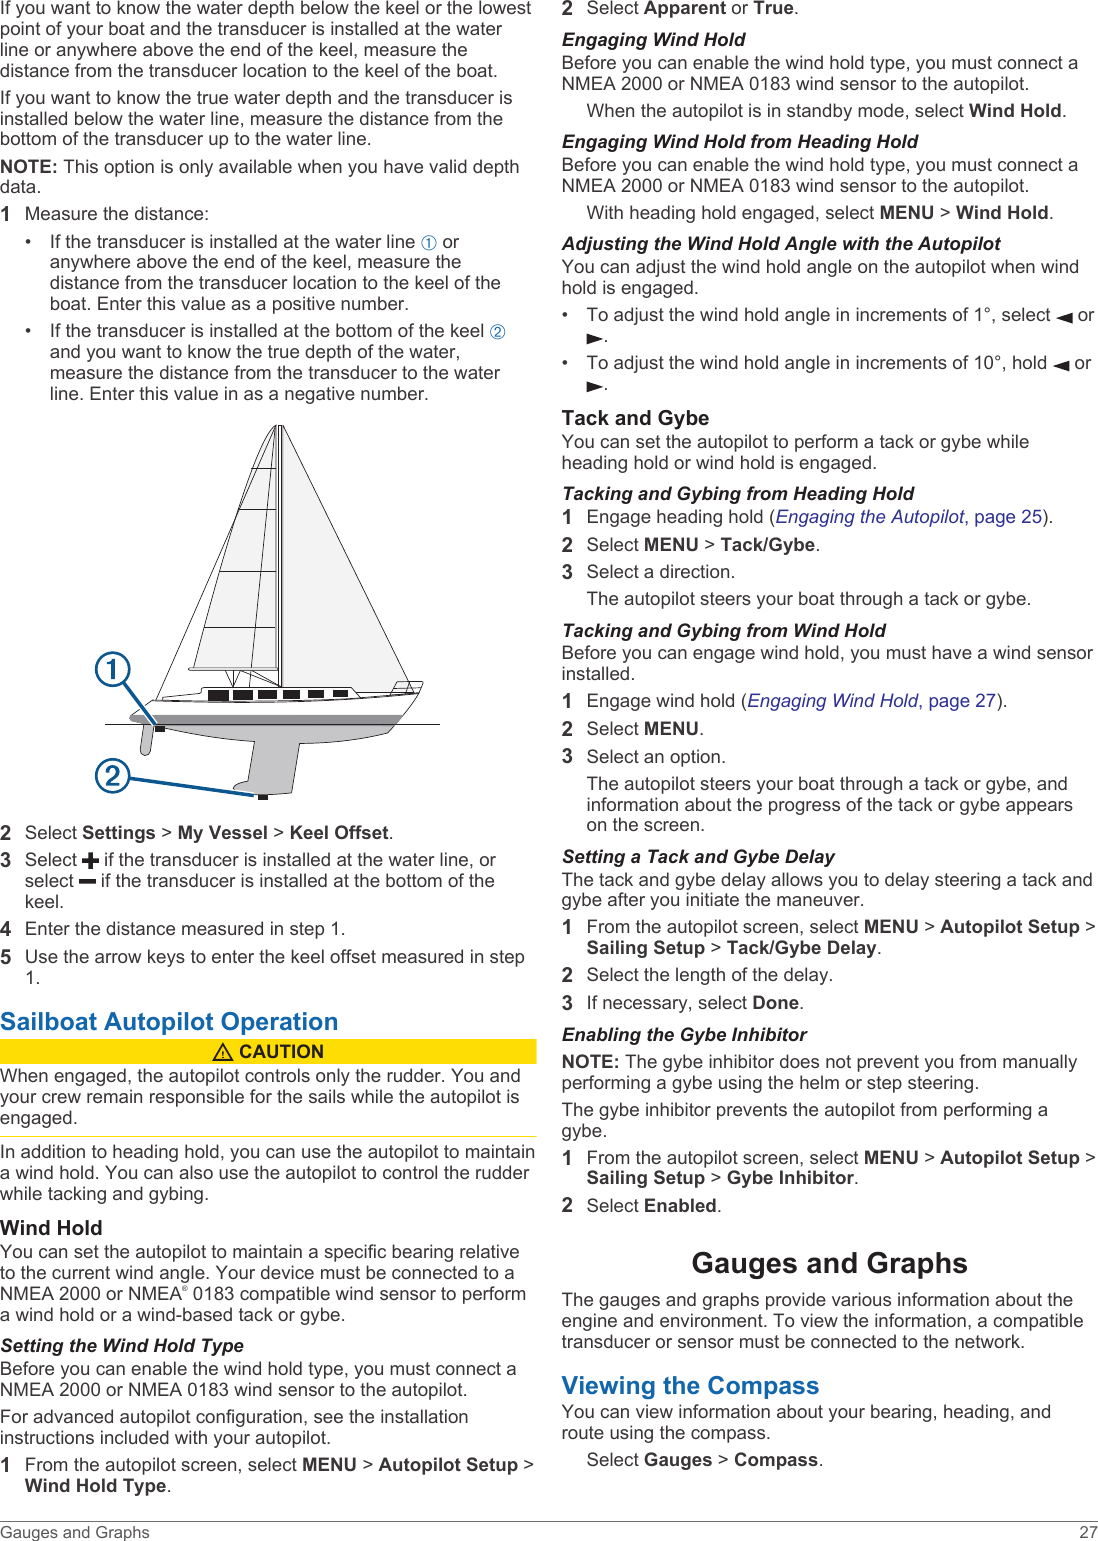 If you want to know the water depth below the keel or the lowest point of your boat and the transducer is installed at the water line or anywhere above the end of the keel, measure the distance from the transducer location to the keel of the boat.If you want to know the true water depth and the transducer is installed below the water line, measure the distance from the bottom of the transducer up to the water line.NOTE: This option is only available when you have valid depth data.1Measure the distance:• If the transducer is installed at the water line À or anywhere above the end of the keel, measure the distance from the transducer location to the keel of the boat. Enter this value as a positive number.• If the transducer is installed at the bottom of the keel Á and you want to know the true depth of the water, measure the distance from the transducer to the water line. Enter this value in as a negative number.2Select Settings &gt; My Vessel &gt; Keel Offset.3Select   if the transducer is installed at the water line, or select   if the transducer is installed at the bottom of the keel.4Enter the distance measured in step 1.5Use the arrow keys to enter the keel offset measured in step 1.Sailboat Autopilot Operation CAUTIONWhen engaged, the autopilot controls only the rudder. You and your crew remain responsible for the sails while the autopilot is engaged.In addition to heading hold, you can use the autopilot to maintain a wind hold. You can also use the autopilot to control the rudder while tacking and gybing.Wind HoldYou can set the autopilot to maintain a specific bearing relative to the current wind angle. Your device must be connected to a NMEA 2000 or NMEA® 0183 compatible wind sensor to perform a wind hold or a wind-based tack or gybe.Setting the Wind Hold TypeBefore you can enable the wind hold type, you must connect a NMEA 2000 or NMEA 0183 wind sensor to the autopilot.For advanced autopilot configuration, see the installation instructions included with your autopilot.1From the autopilot screen, select MENU &gt; Autopilot Setup &gt; Wind Hold Type.2Select Apparent or True.Engaging Wind HoldBefore you can enable the wind hold type, you must connect a NMEA 2000 or NMEA 0183 wind sensor to the autopilot.When the autopilot is in standby mode, select Wind Hold.Engaging Wind Hold from Heading HoldBefore you can enable the wind hold type, you must connect a NMEA 2000 or NMEA 0183 wind sensor to the autopilot.With heading hold engaged, select MENU &gt; Wind Hold.Adjusting the Wind Hold Angle with the AutopilotYou can adjust the wind hold angle on the autopilot when wind hold is engaged.• To adjust the wind hold angle in increments of 1°, select   or .• To adjust the wind hold angle in increments of 10°, hold   or .Tack and GybeYou can set the autopilot to perform a tack or gybe while heading hold or wind hold is engaged.Tacking and Gybing from Heading Hold1Engage heading hold (Engaging the Autopilot, page 25).2Select MENU &gt; Tack/Gybe.3Select a direction.The autopilot steers your boat through a tack or gybe.Tacking and Gybing from Wind HoldBefore you can engage wind hold, you must have a wind sensor installed.1Engage wind hold (Engaging Wind Hold, page 27).2Select MENU.3Select an option.The autopilot steers your boat through a tack or gybe, and information about the progress of the tack or gybe appears on the screen.Setting a Tack and Gybe DelayThe tack and gybe delay allows you to delay steering a tack and gybe after you initiate the maneuver.1From the autopilot screen, select MENU &gt; Autopilot Setup &gt; Sailing Setup &gt; Tack/Gybe Delay.2Select the length of the delay.3If necessary, select Done.Enabling the Gybe InhibitorNOTE: The gybe inhibitor does not prevent you from manually performing a gybe using the helm or step steering.The gybe inhibitor prevents the autopilot from performing a gybe.1From the autopilot screen, select MENU &gt; Autopilot Setup &gt; Sailing Setup &gt; Gybe Inhibitor.2Select Enabled.Gauges and GraphsThe gauges and graphs provide various information about the engine and environment. To view the information, a compatible transducer or sensor must be connected to the network.Viewing the CompassYou can view information about your bearing, heading, and route using the compass.Select Gauges &gt; Compass.Gauges and Graphs 27